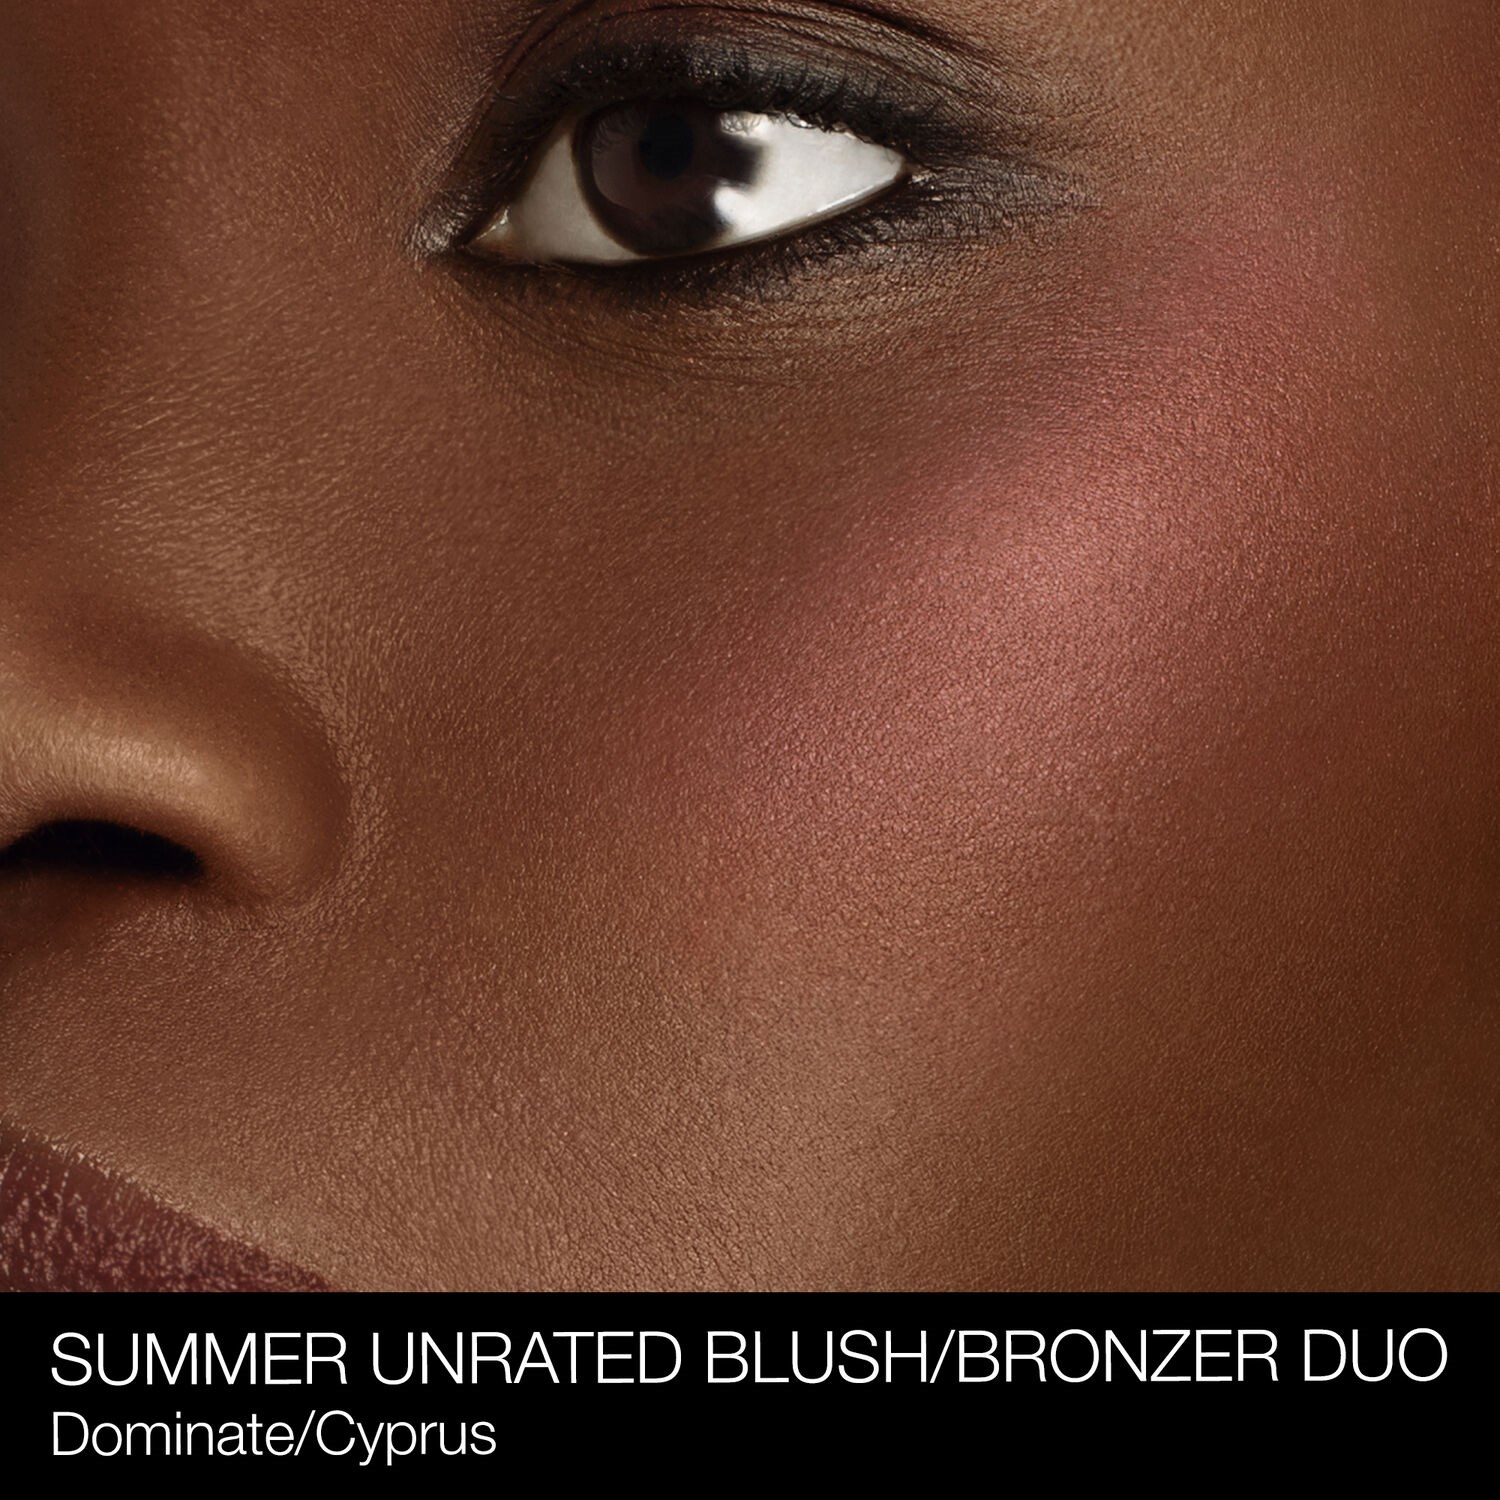 SUMMER UNRATED BLUSH/BRONZER DUO 5